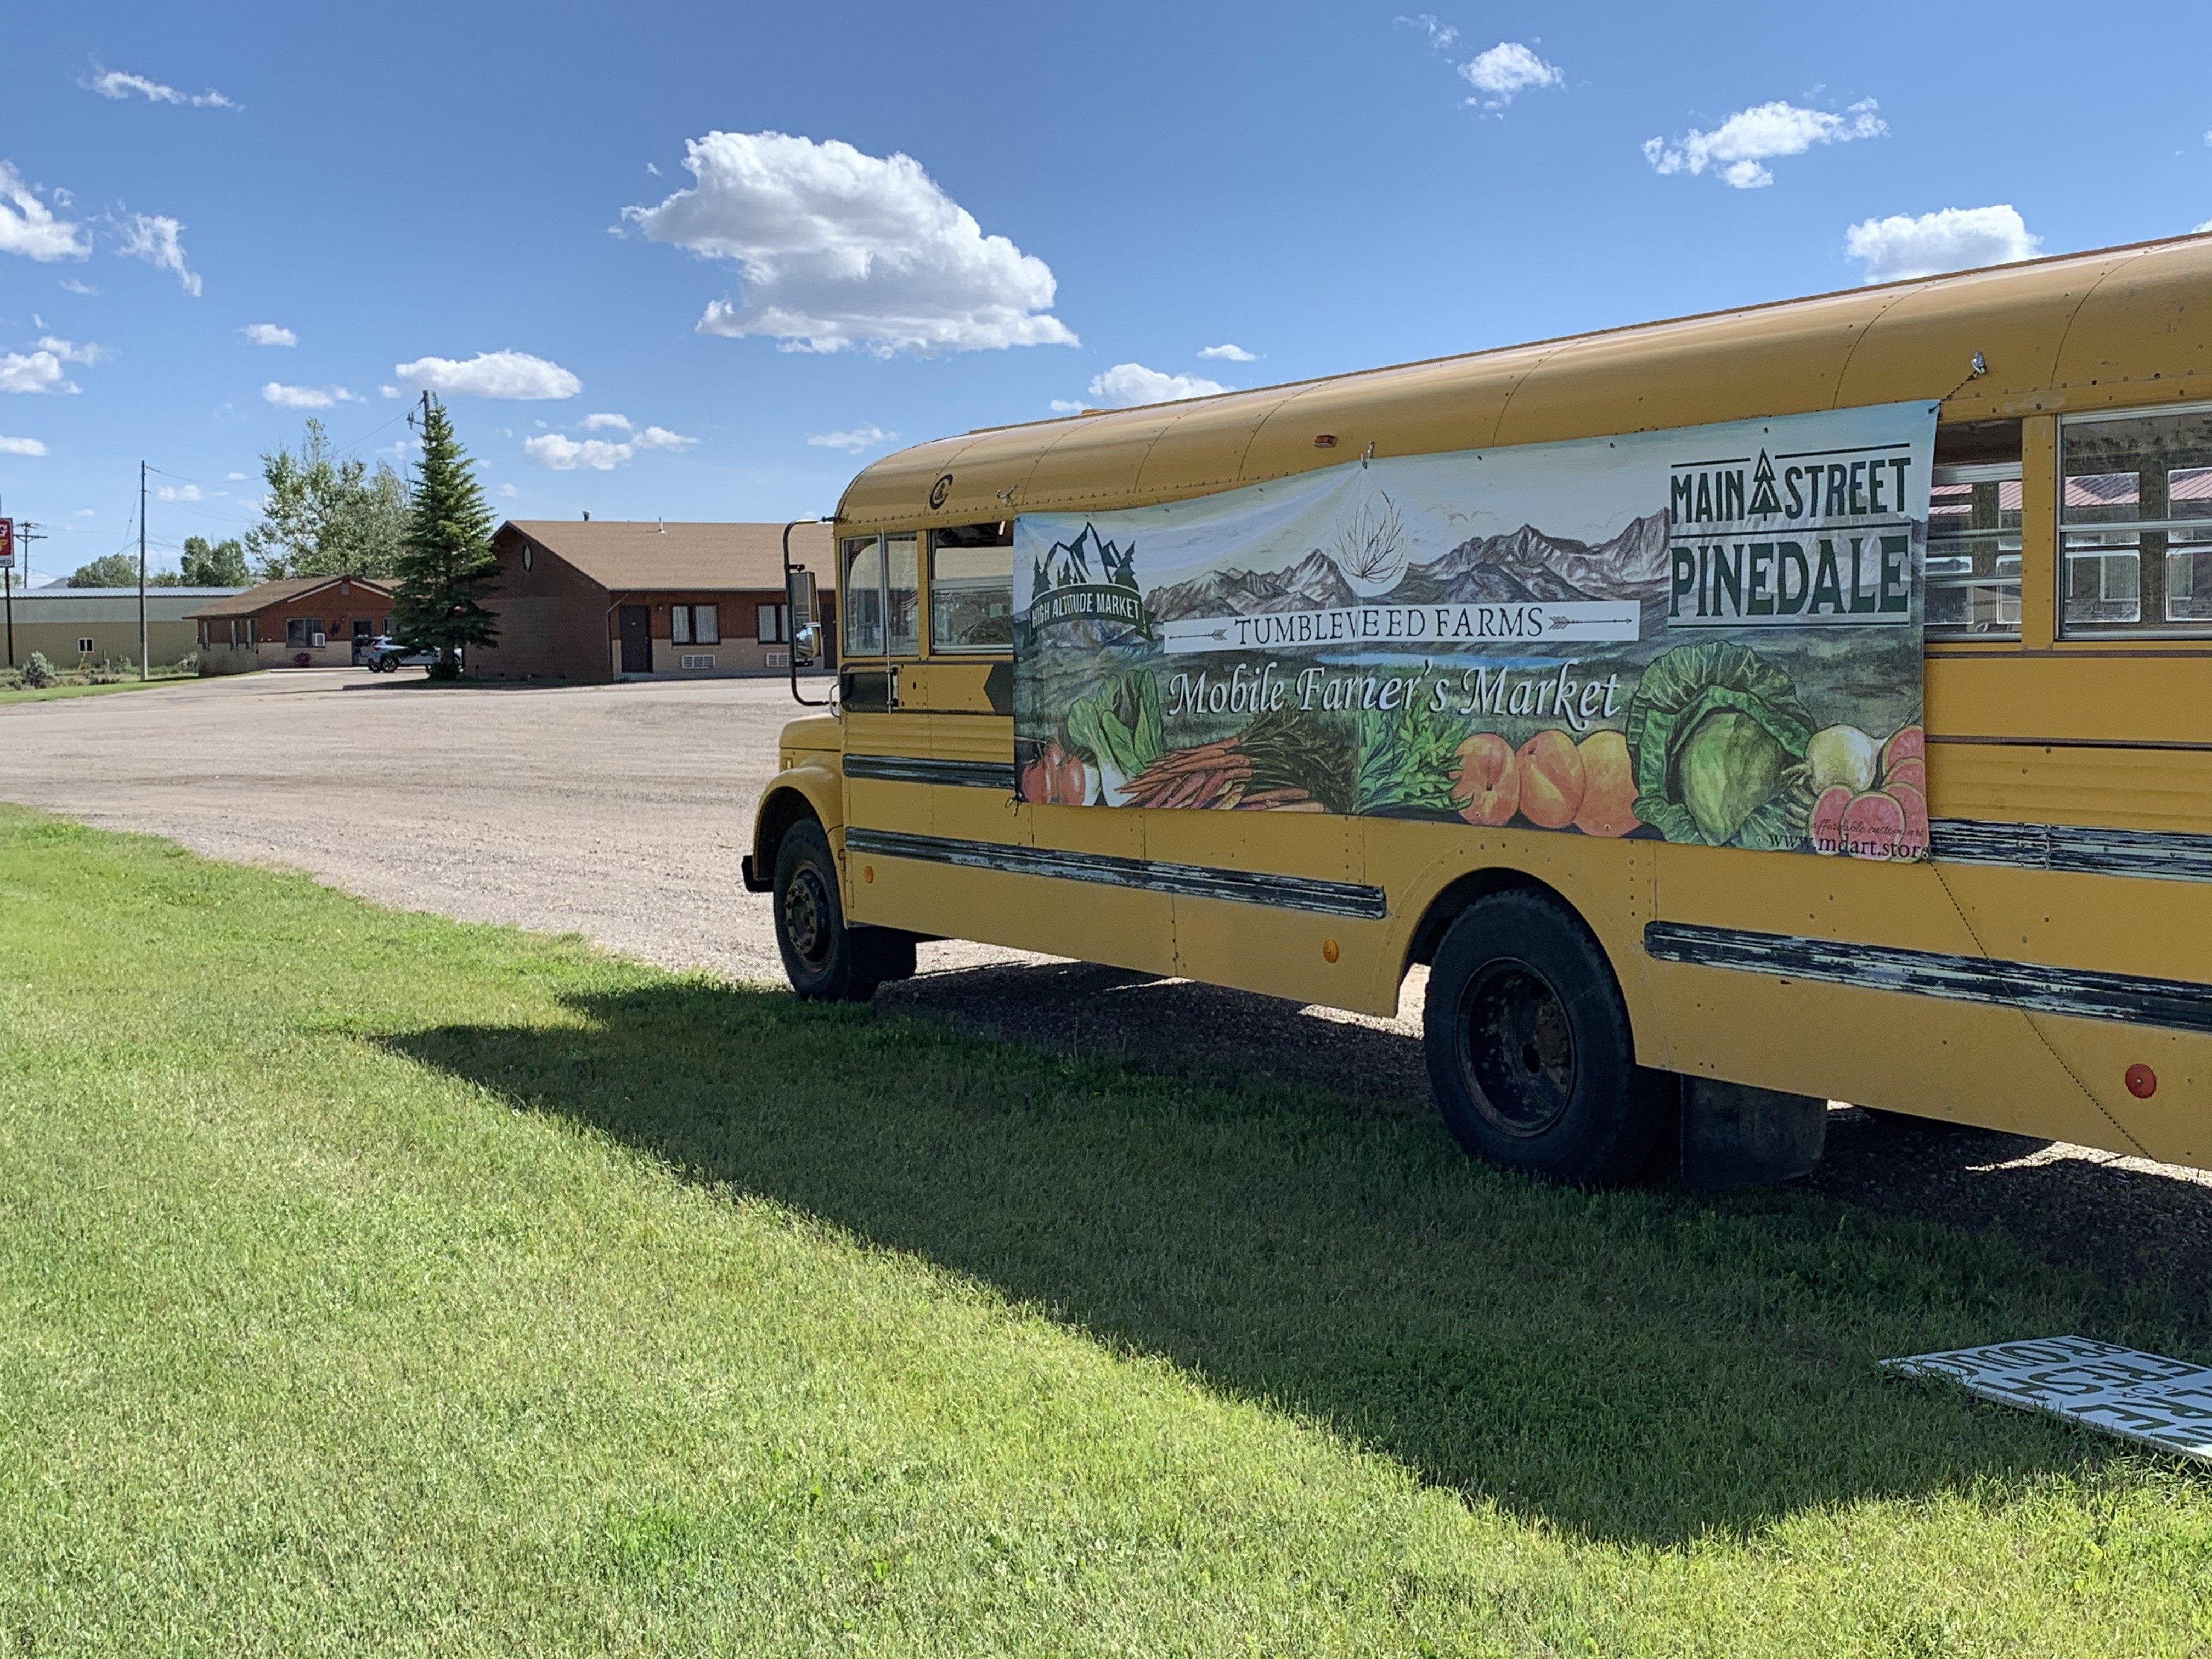 Next Happening: Farm Happenings for July 9, 2020